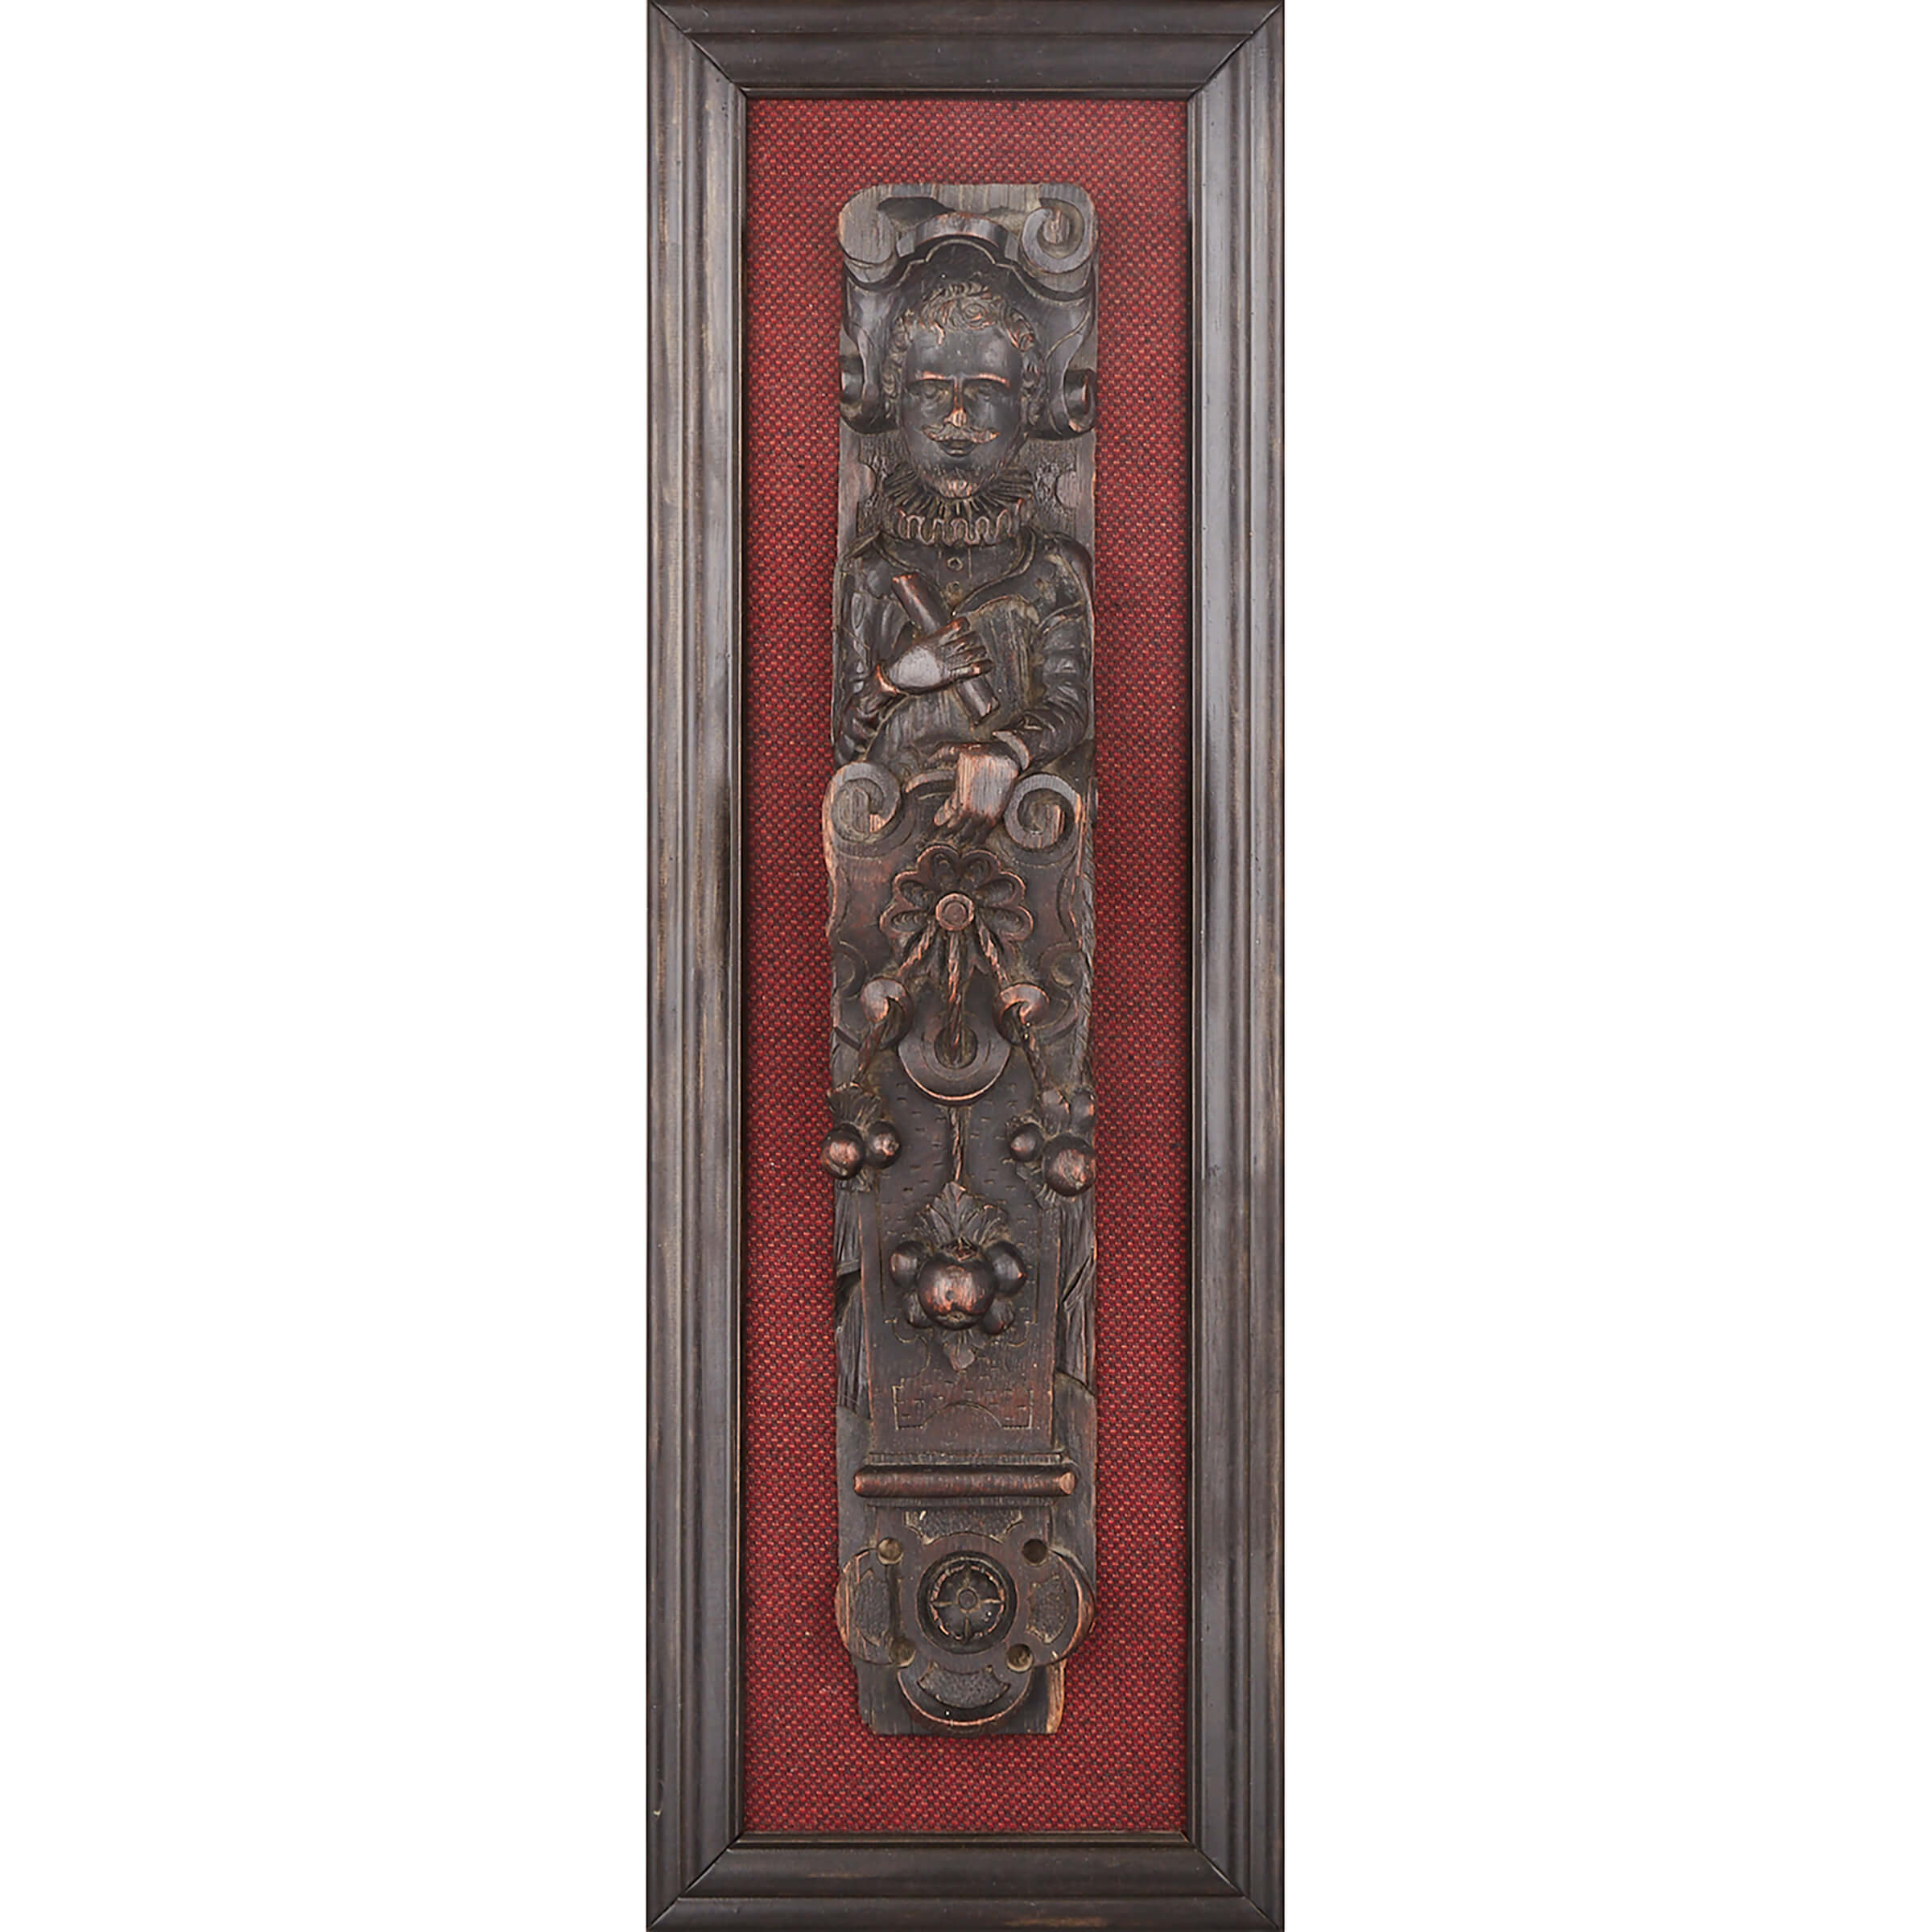 English Carved Oak Figural Term, 16th/17th century